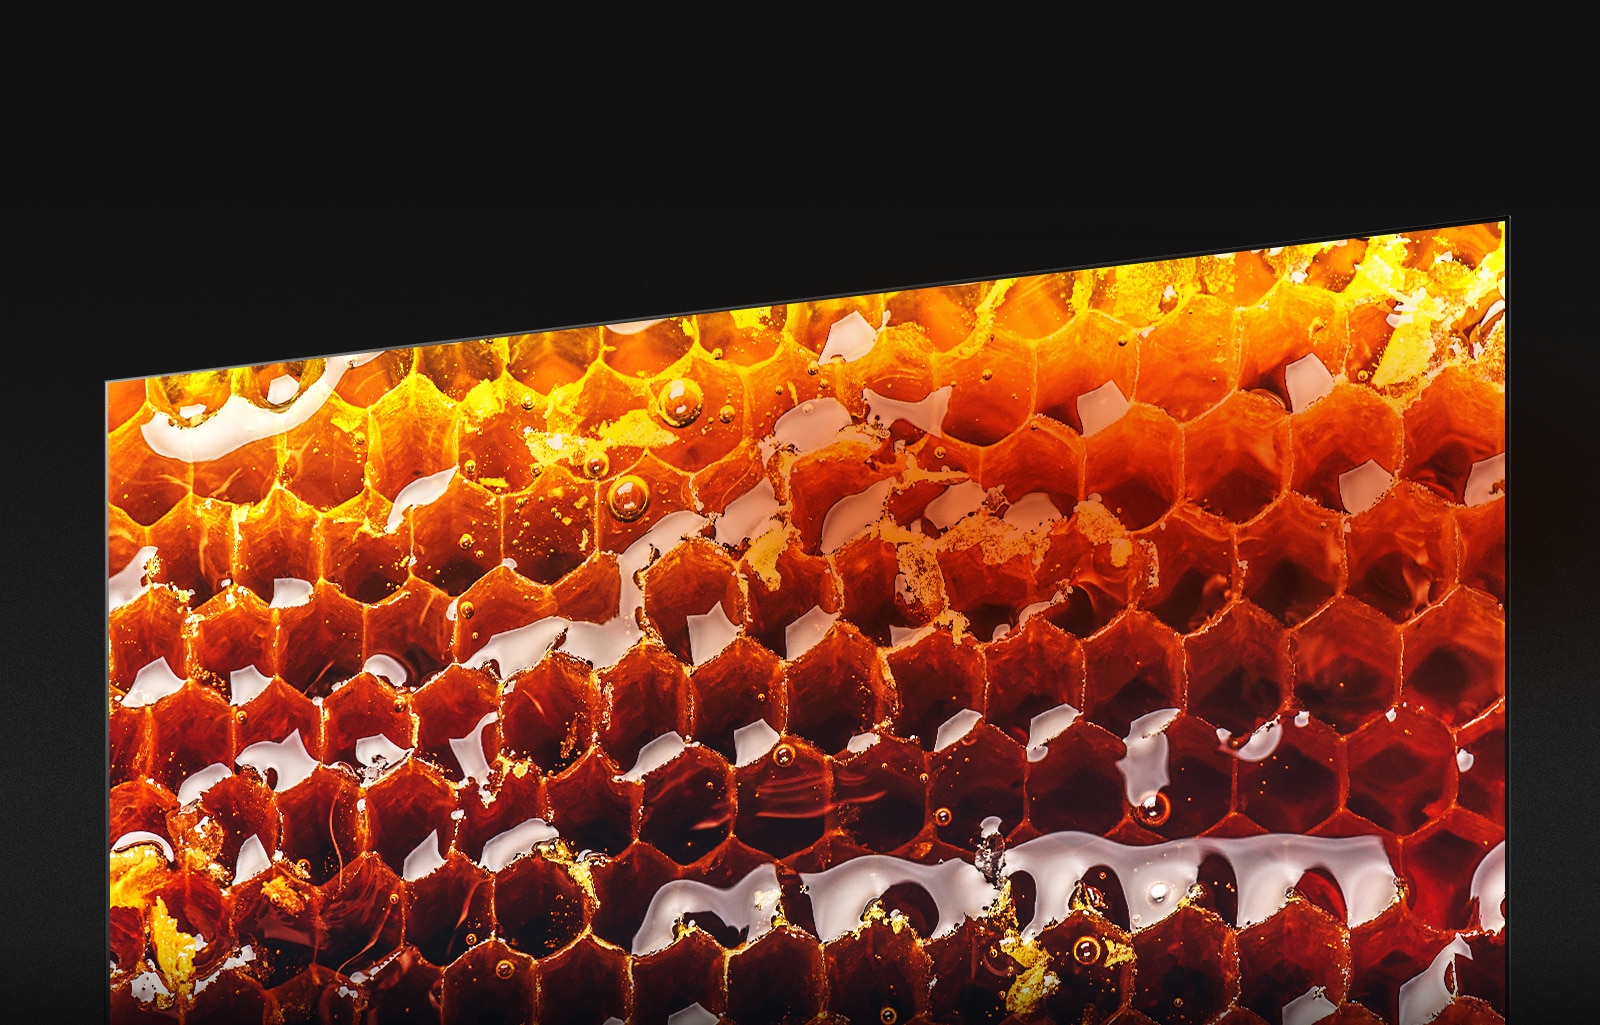 Image of beehive in the screen of LG SIGNATURE OLED TV Z9 expressing its vivid color